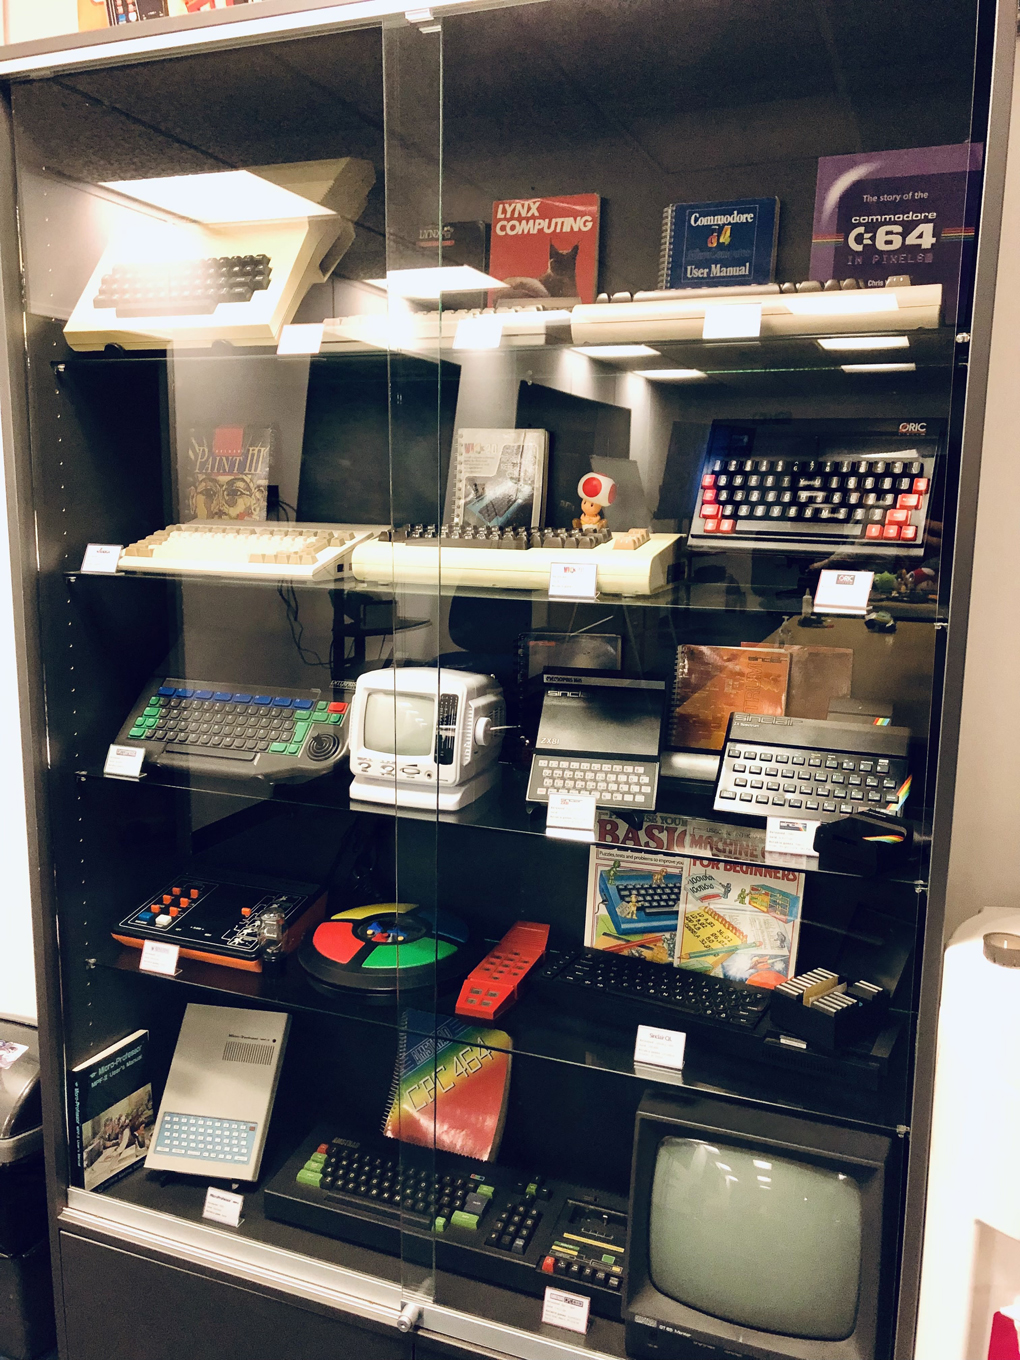 A display cabinet filled with computers from the 1980s, including various Spectrums, Commodores, Amstrads, and Amigas.